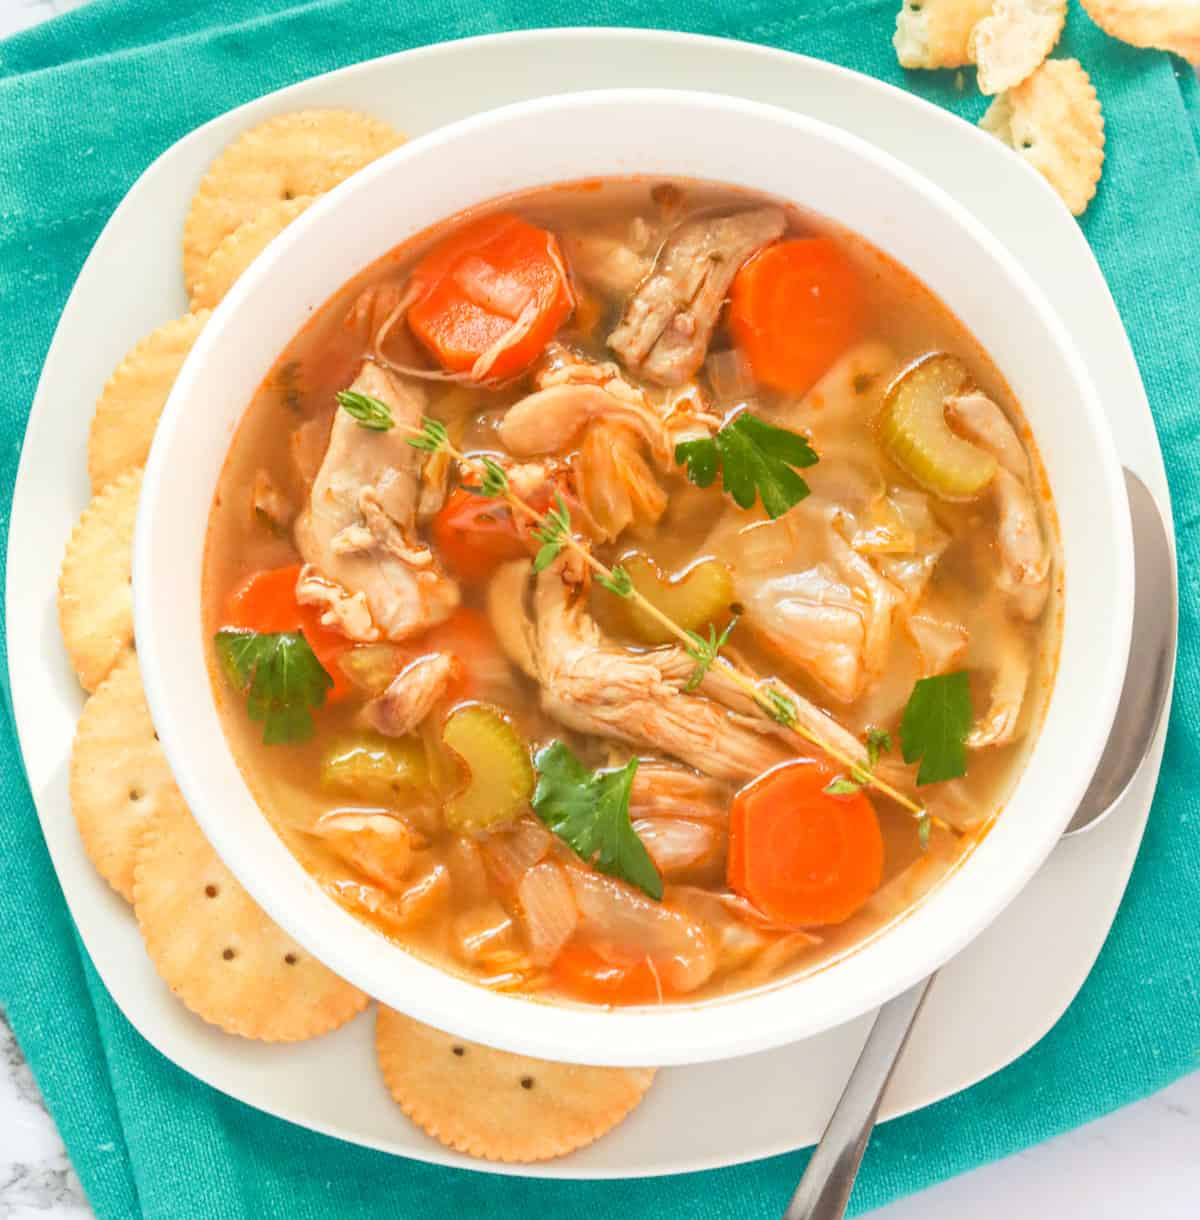 Chicken Cabbage Soup - Yet satisfying soup becomes the comfort food of everyone